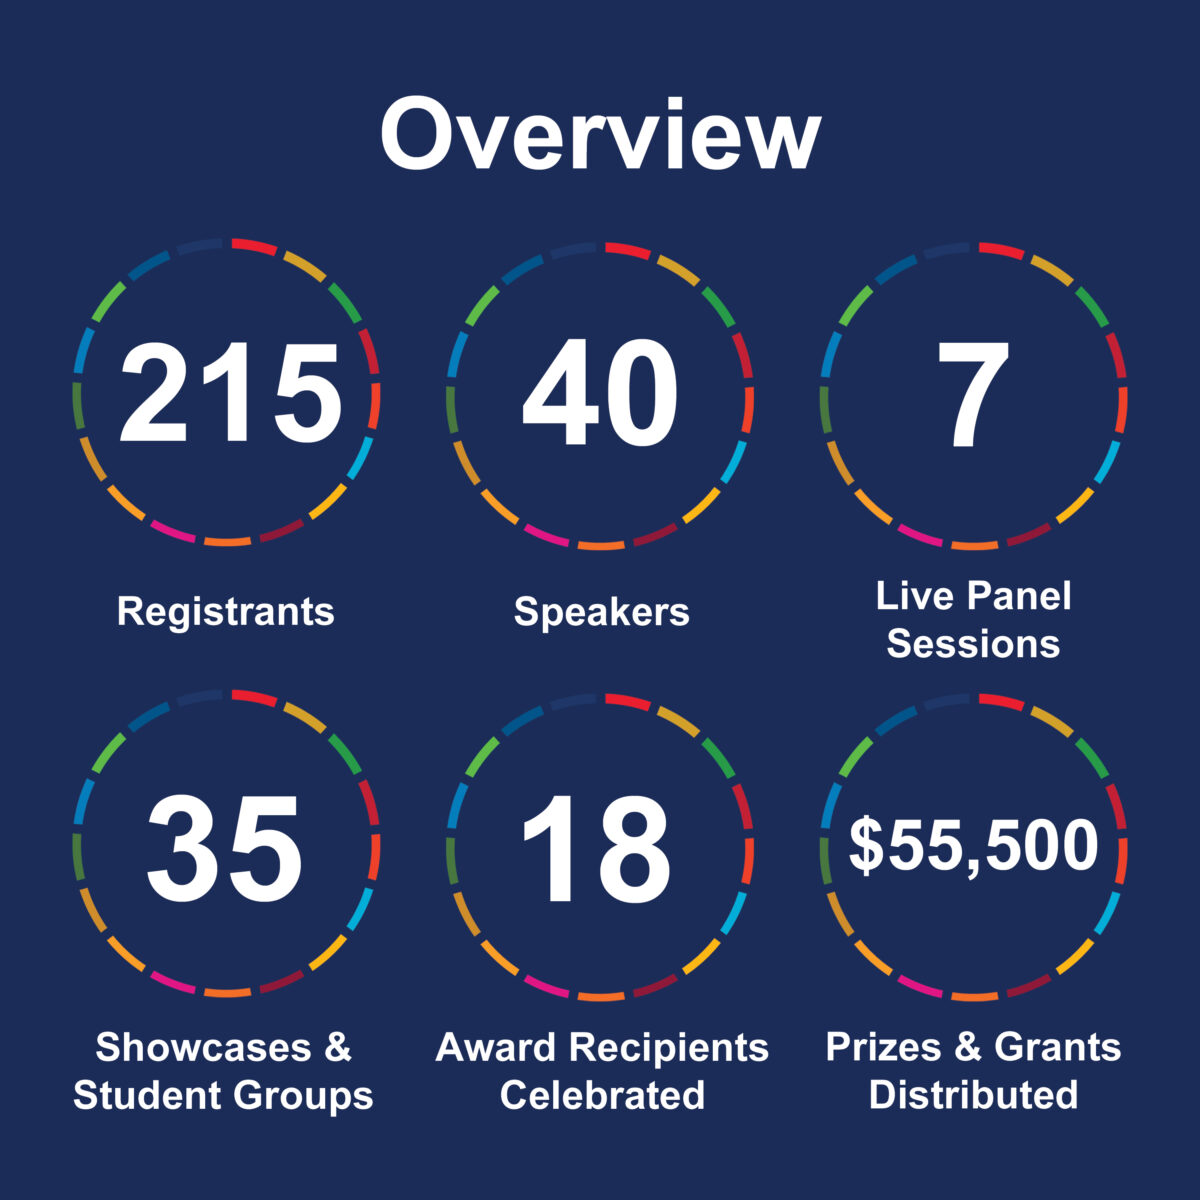 Overview info graphic: 215 registrants, 40 speakers, 7 live panel sessions, 35 showcases and student groups, 18 award recipients, $55,500 prizes and grants distributed